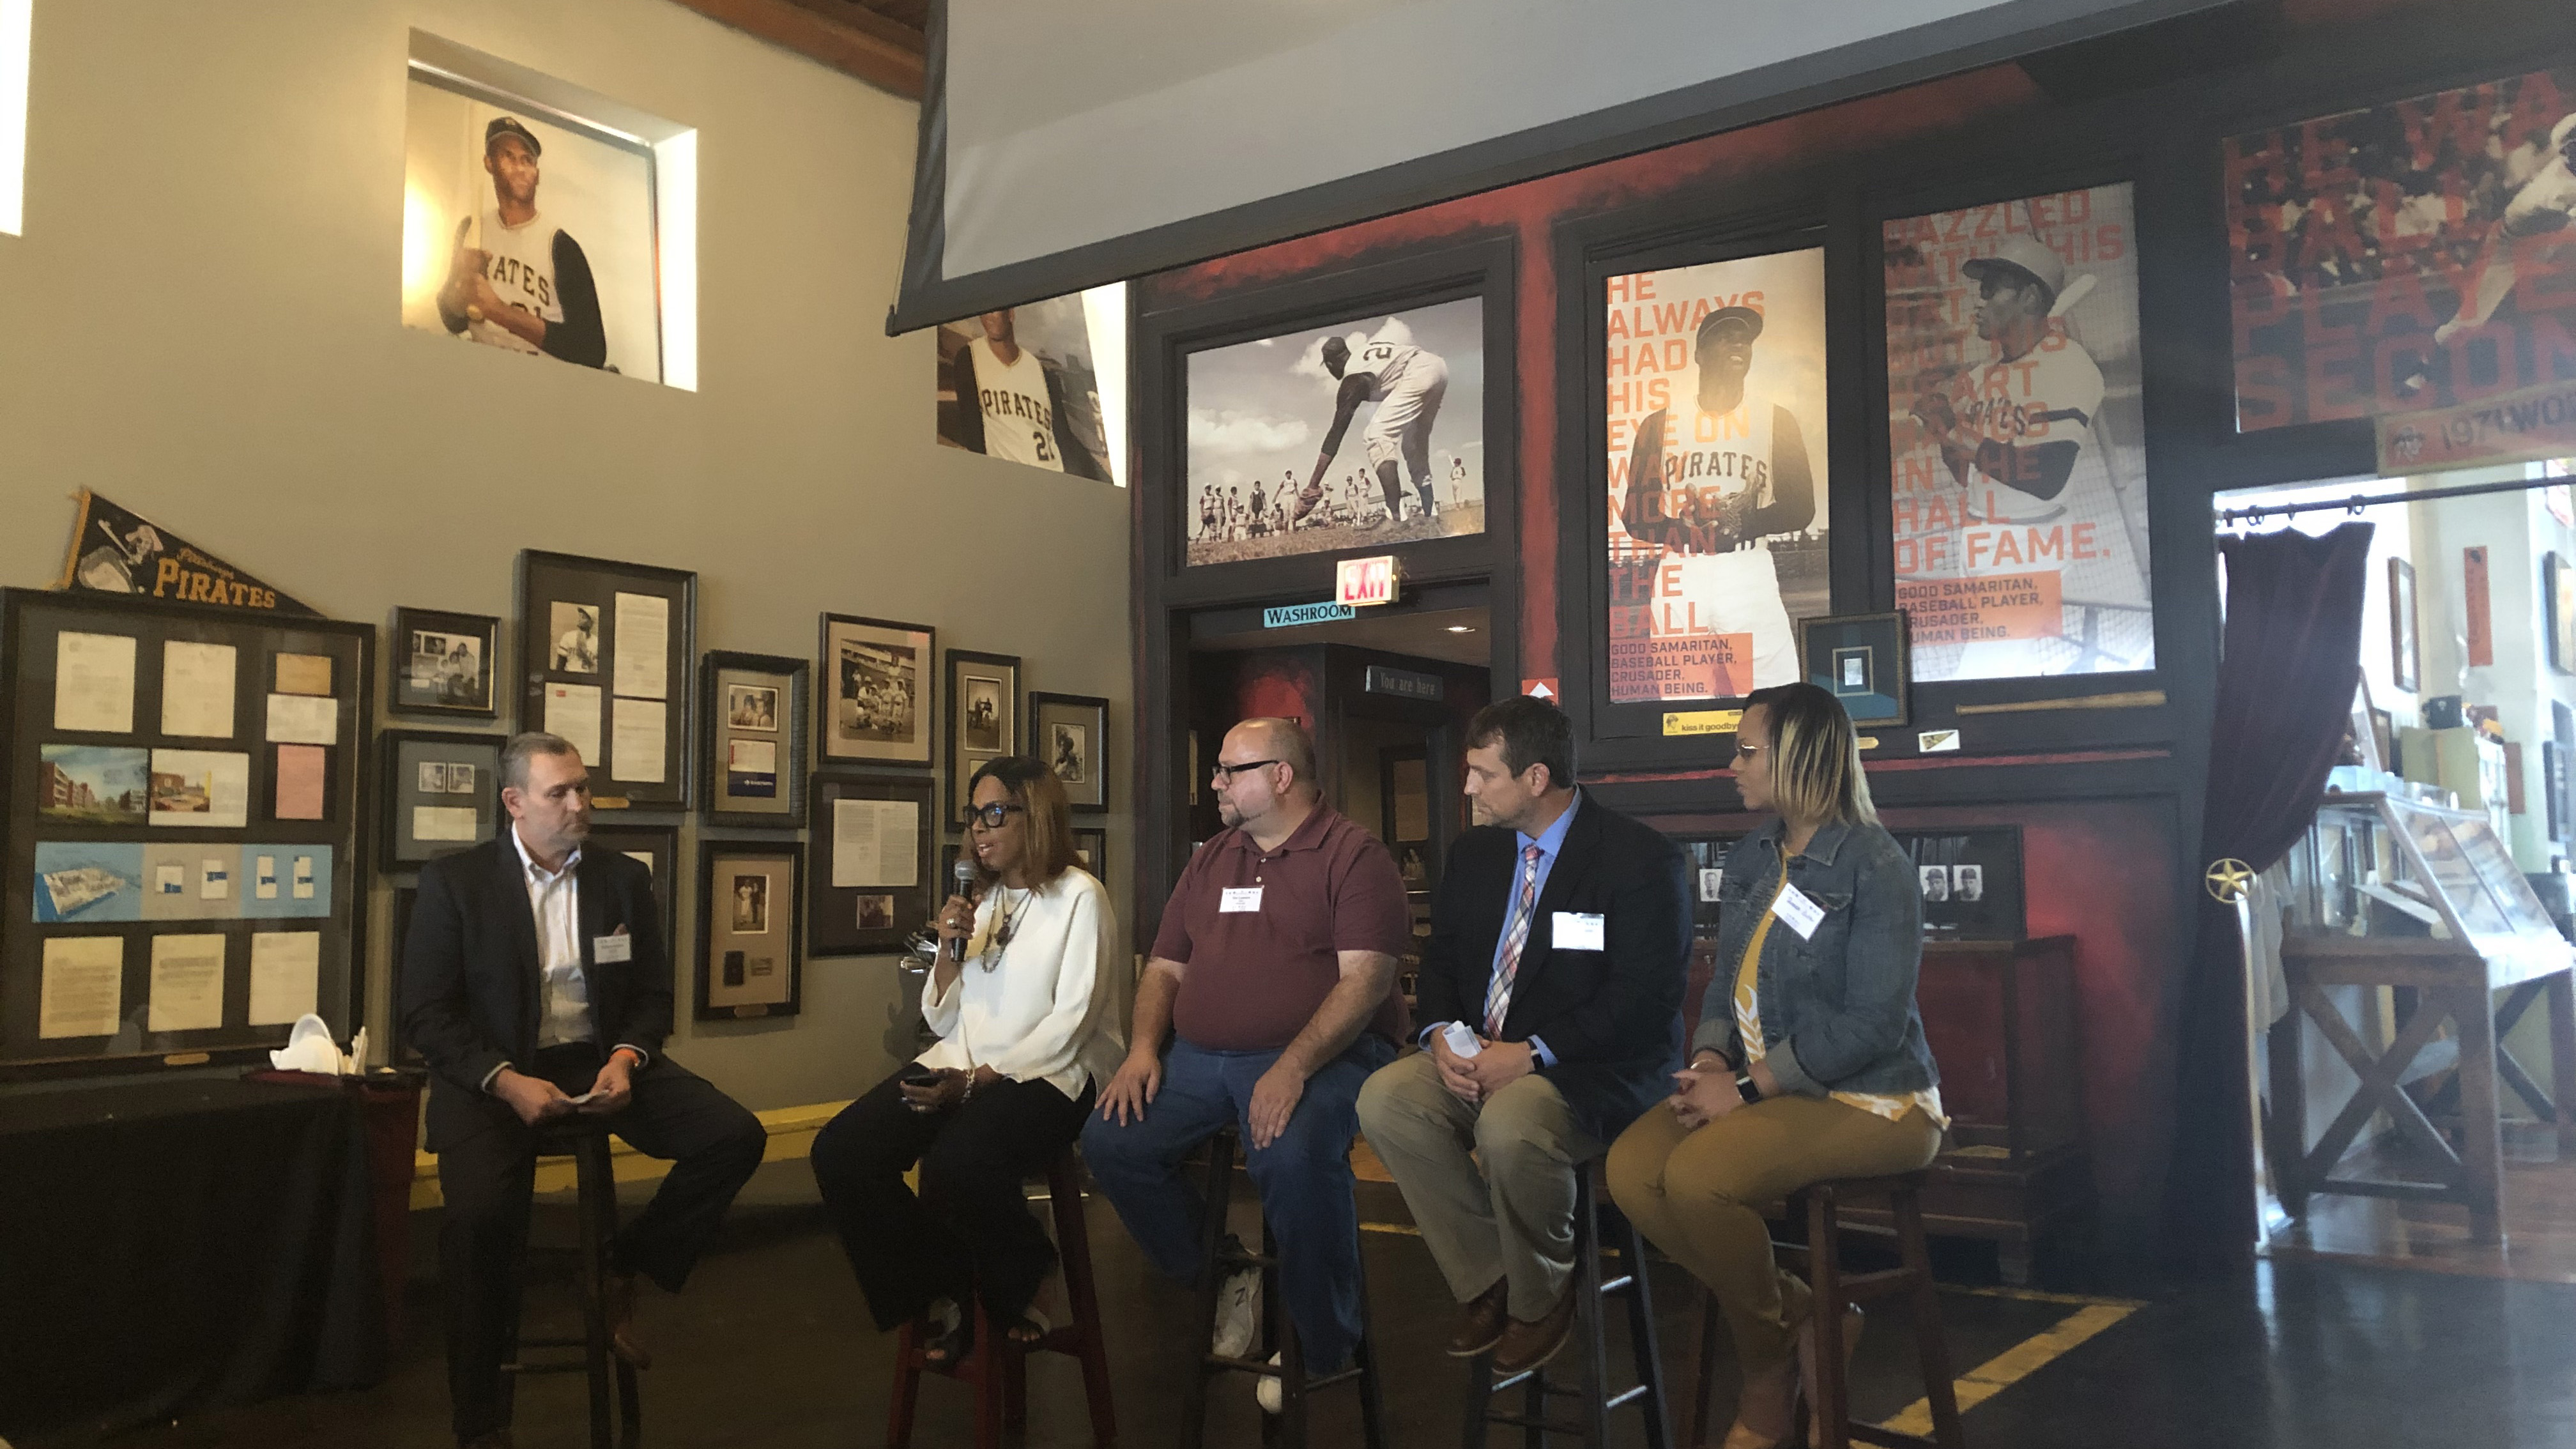 The 2019 Military Challenge Grant Event at the Roberto Clemente Museum in Pittsburgh